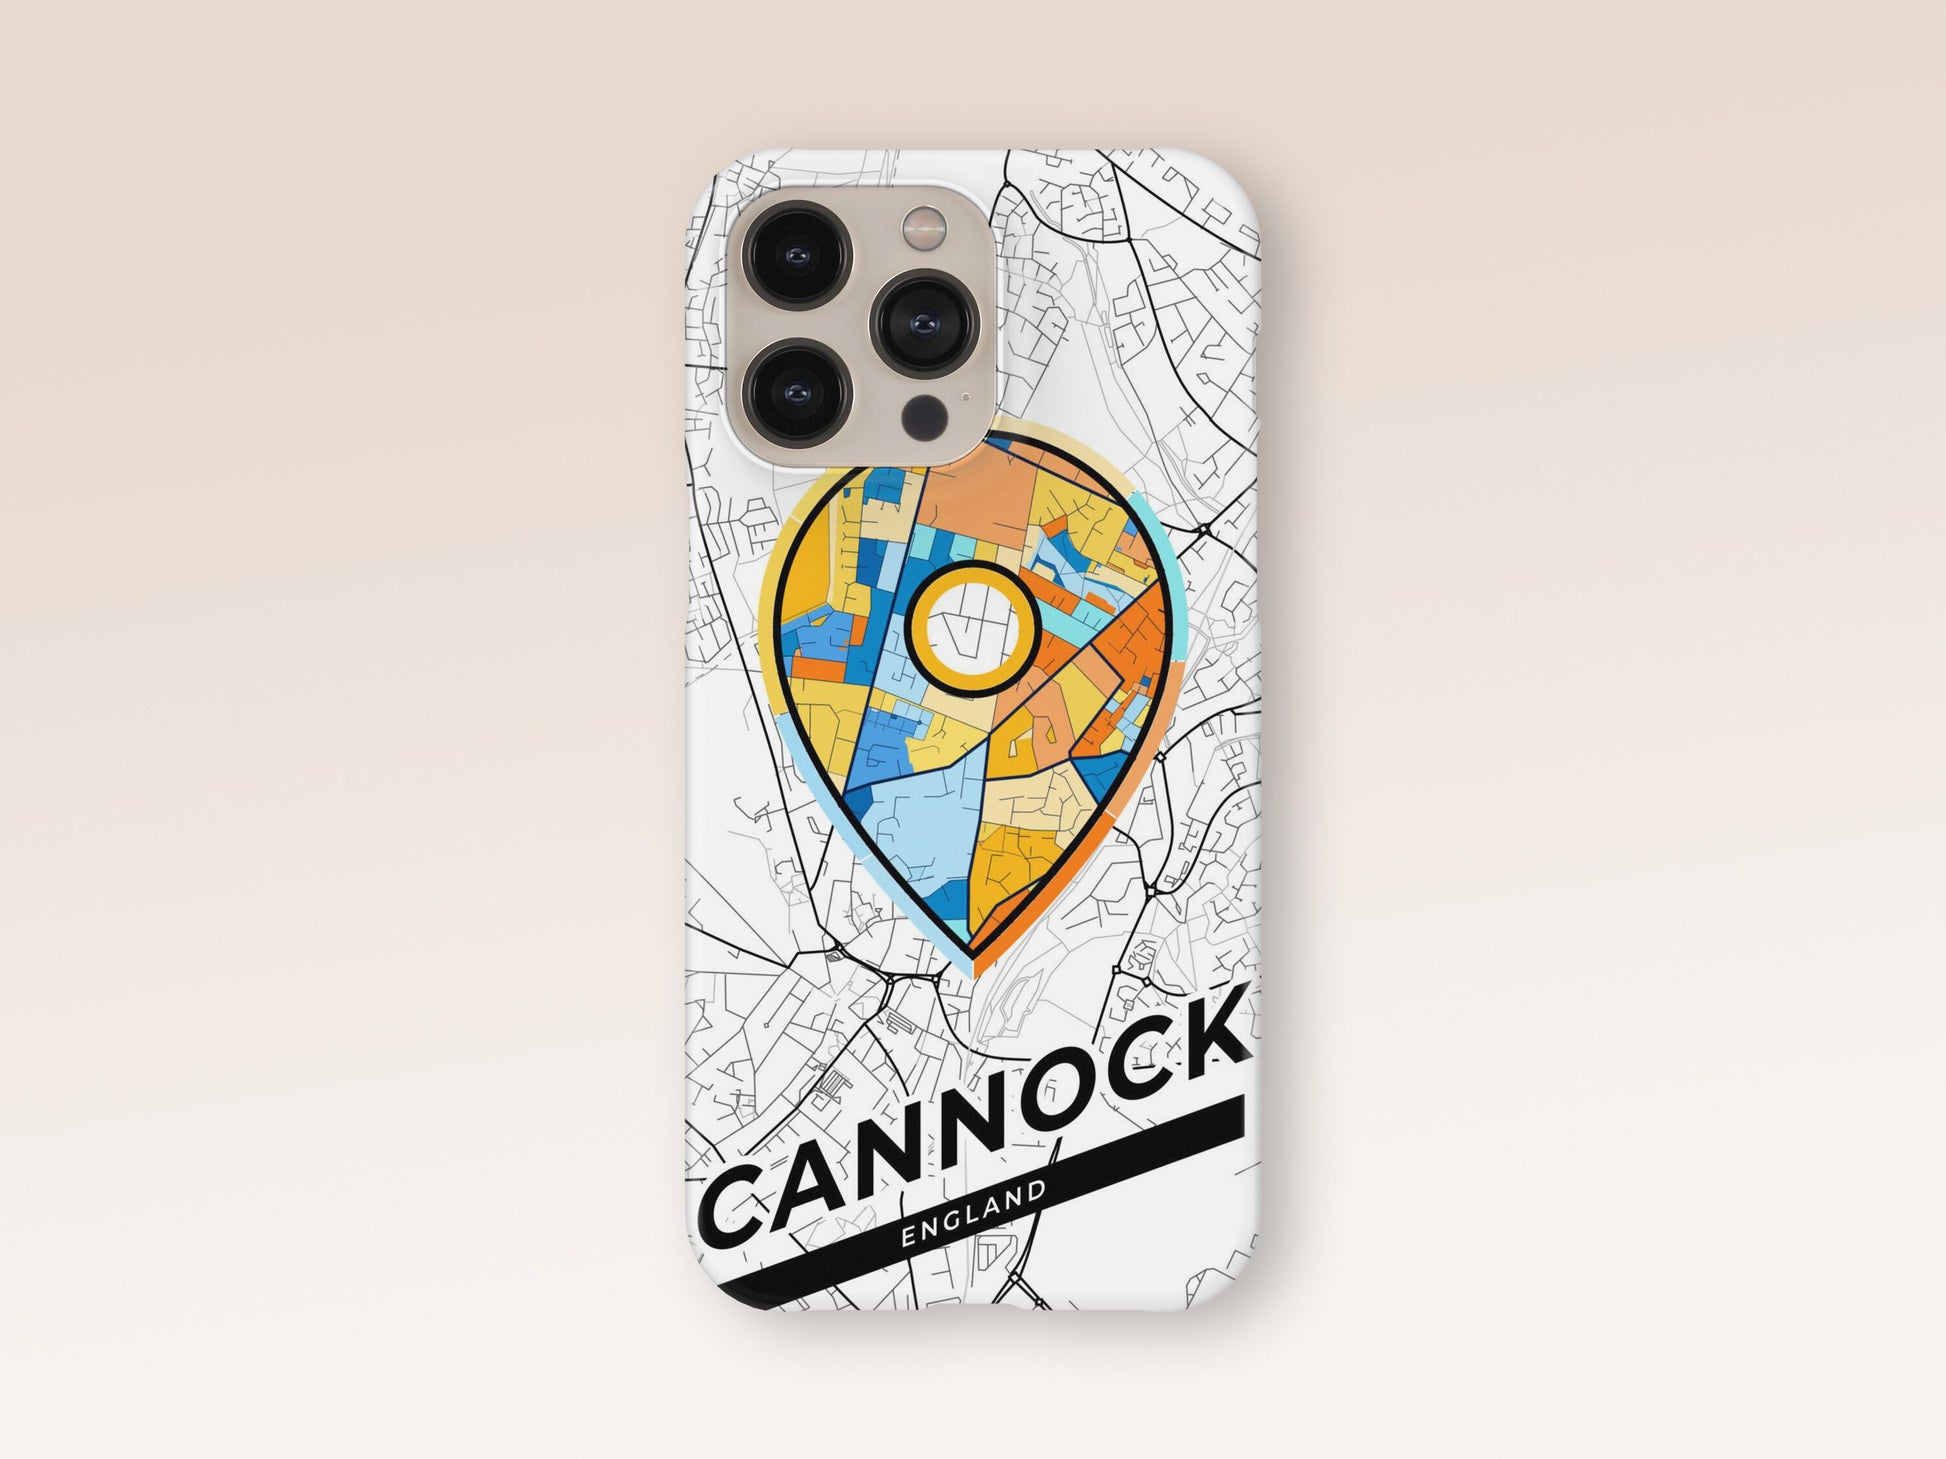 Cannock England slim phone case with colorful icon. Birthday, wedding or housewarming gift. Couple match cases. 1